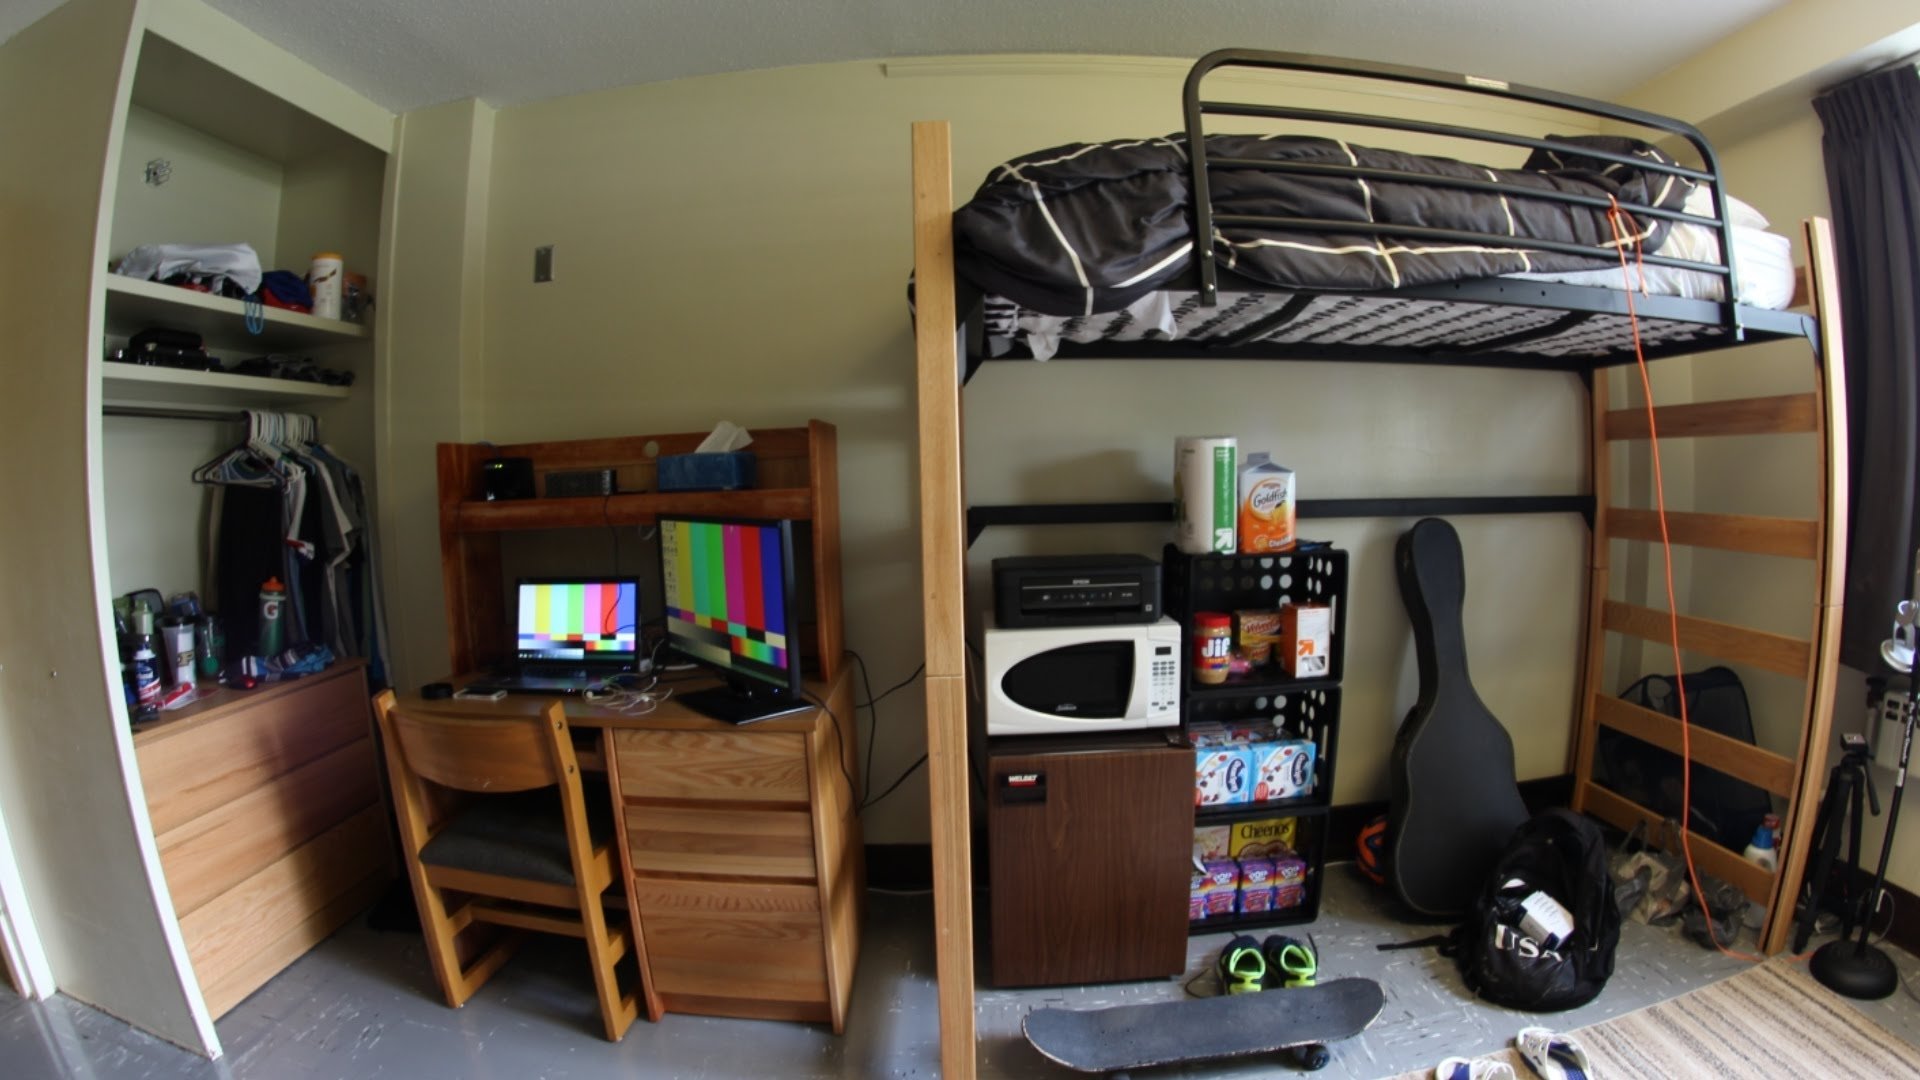 10 Most Recommended College Dorm Room Ideas For Guys college dorm room tour youtube 2022